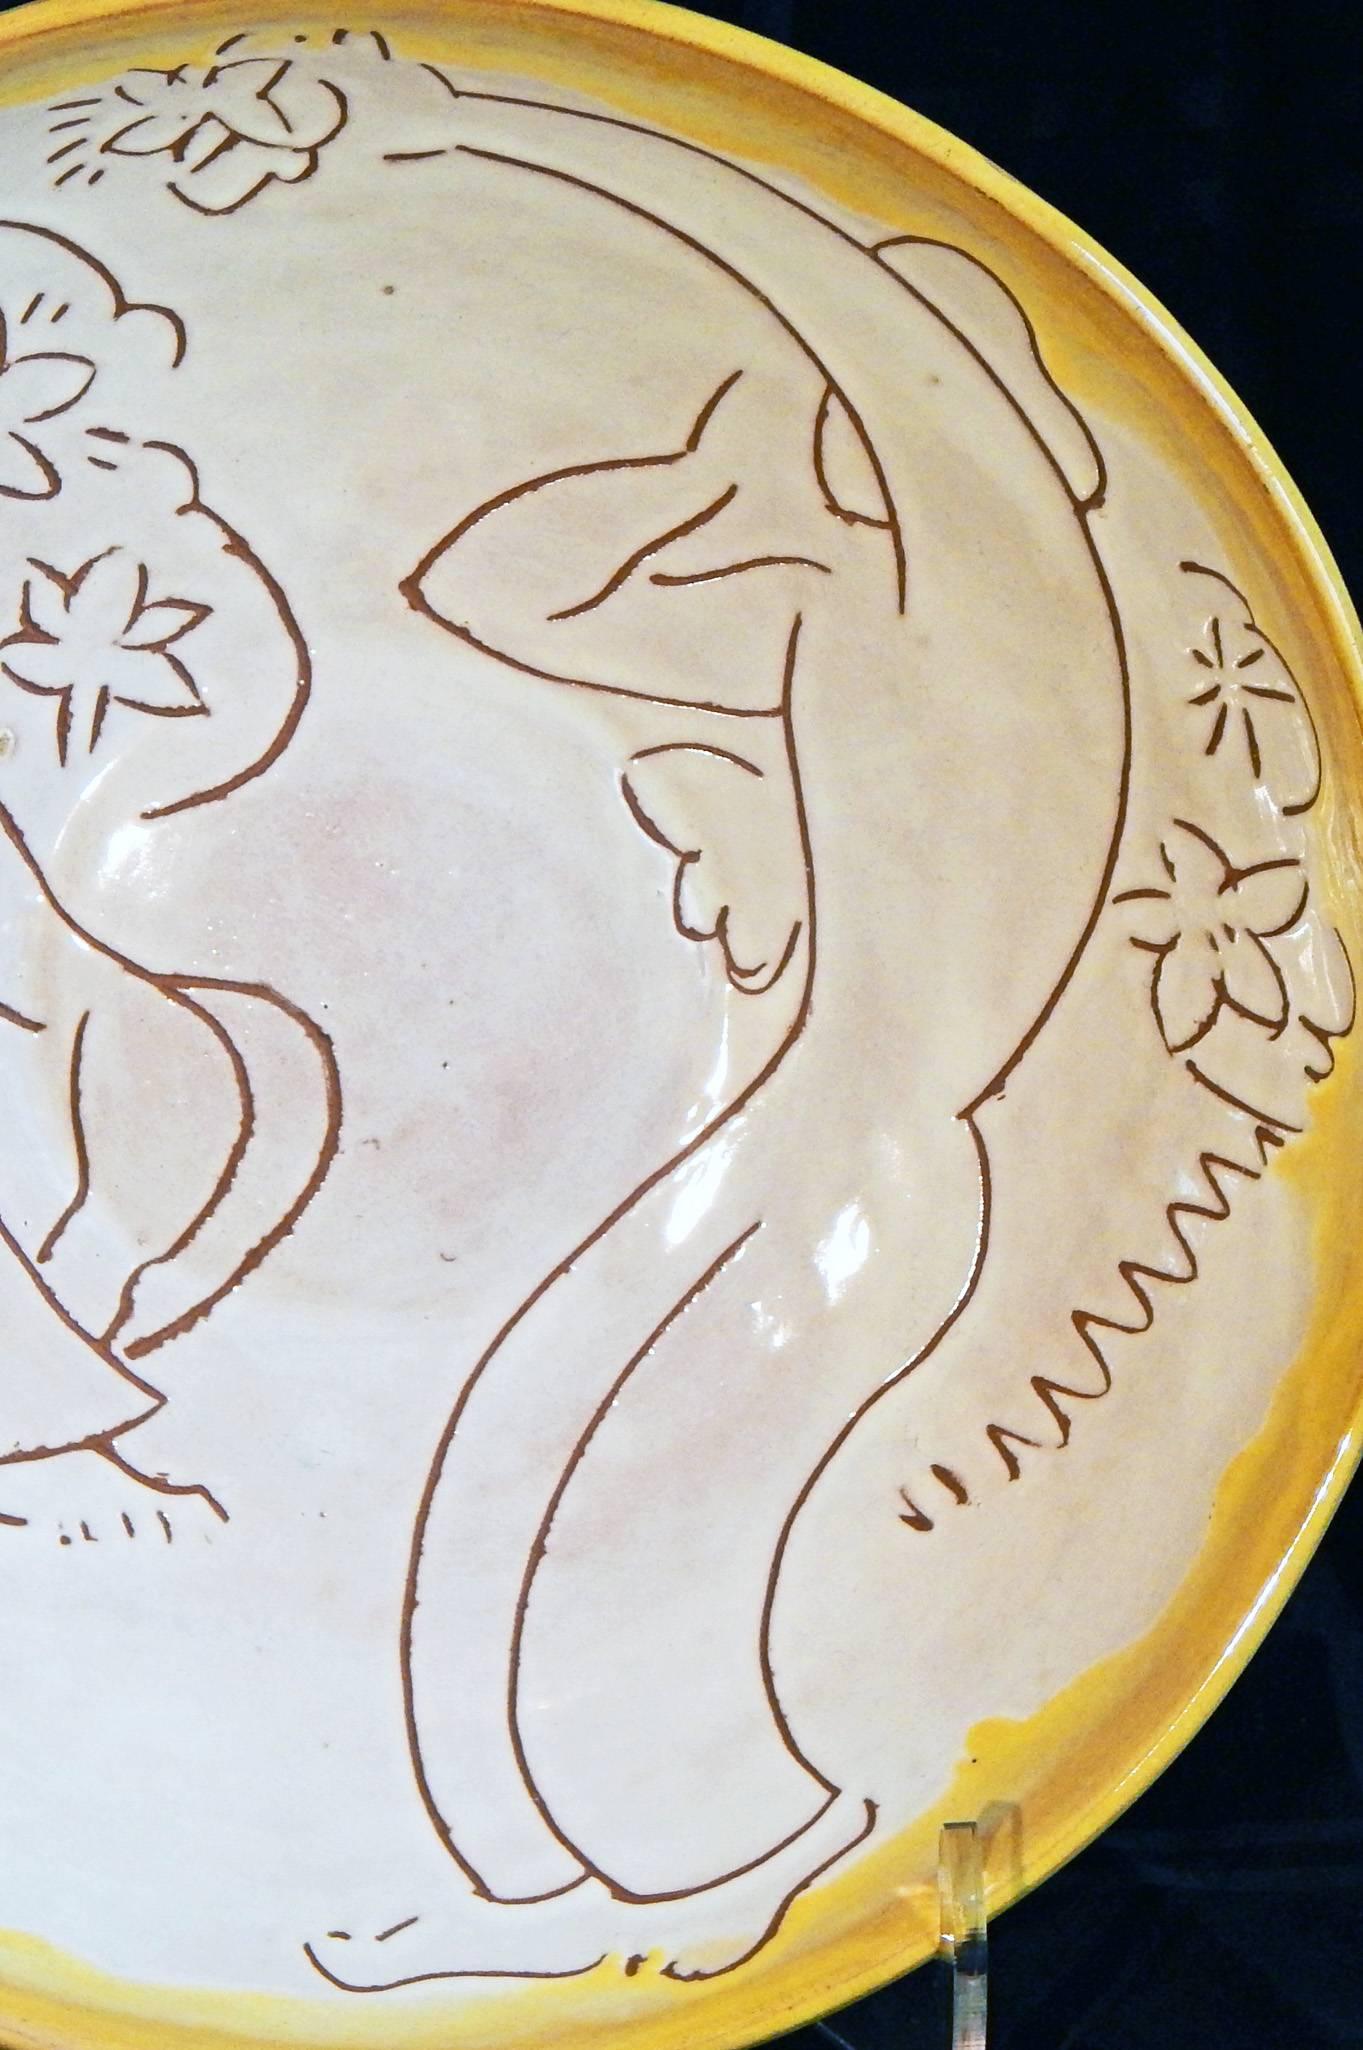 Clearly influenced by Matisse and other European modernists, this large and deep ceramic bowl with sgraffito decoration depicts a female nude and seated man amidst an array of floral motifs, ringed by a brilliant yellow aureole. The artist was Mary